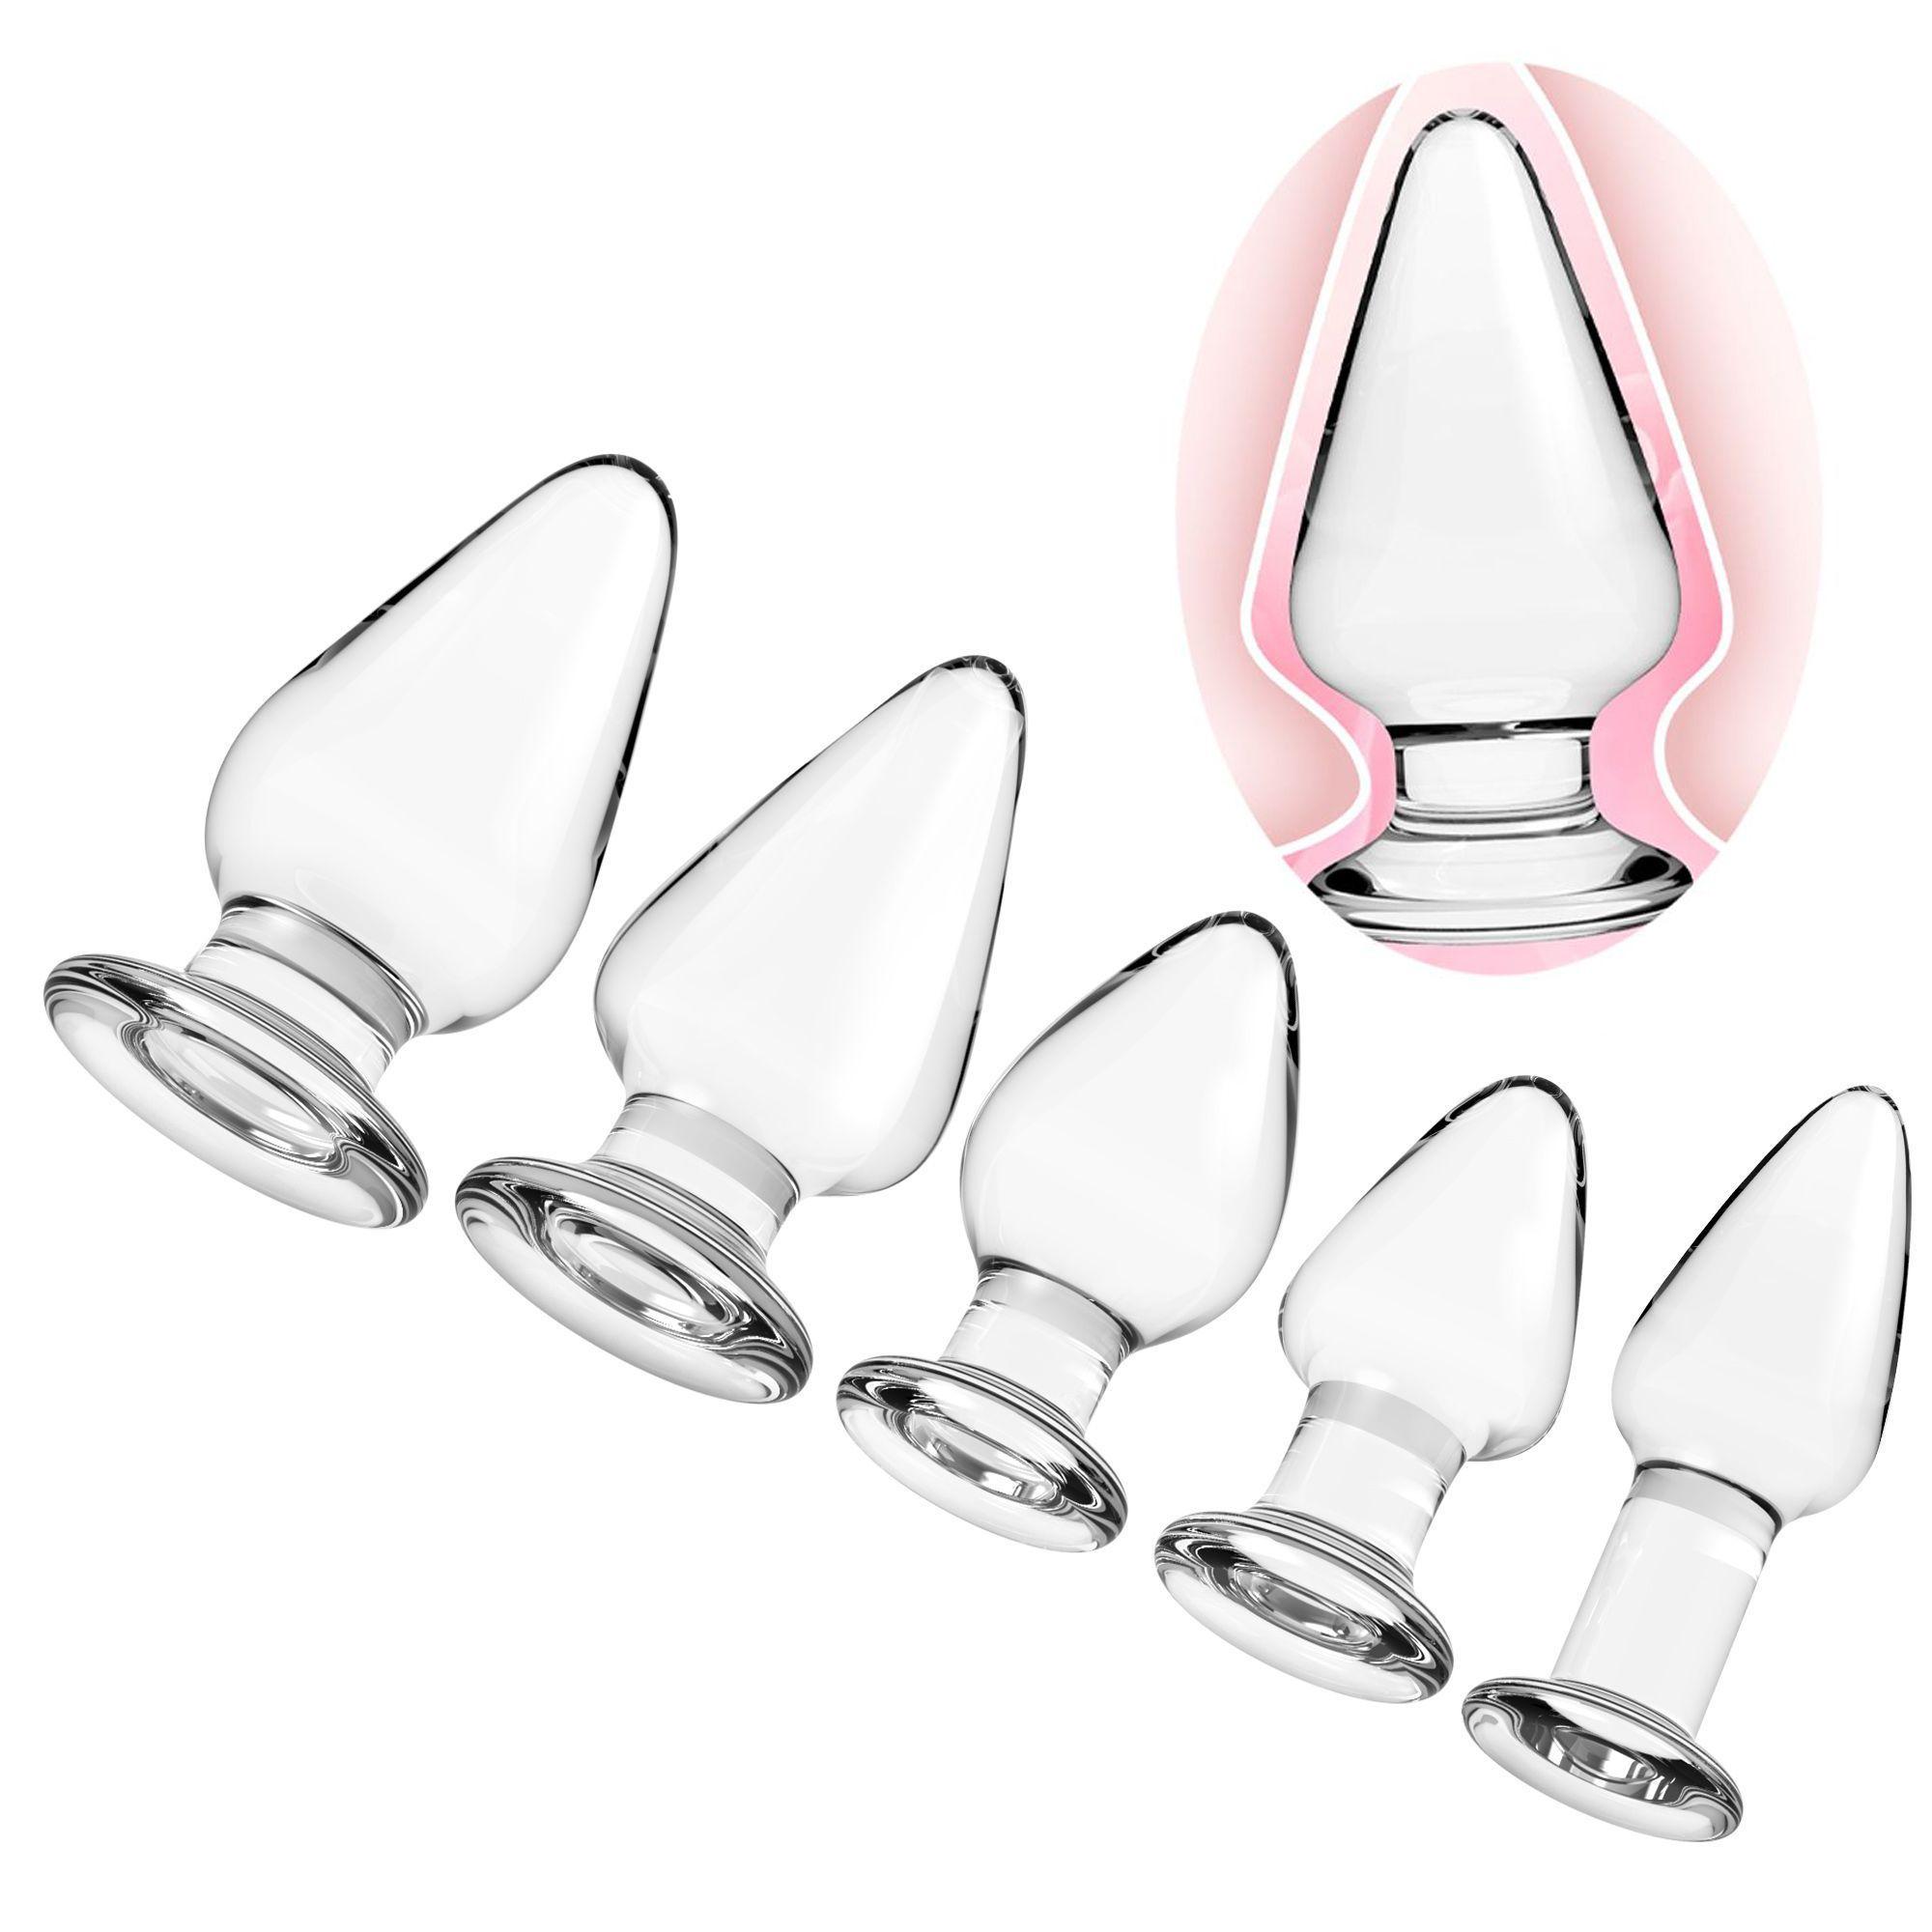 Super Huge Crystal Clear Glass Thick T Shape Anal Plug Set Butt Plugs Trainer Anus Intercourse Sexy Toy For Men Women And Couple